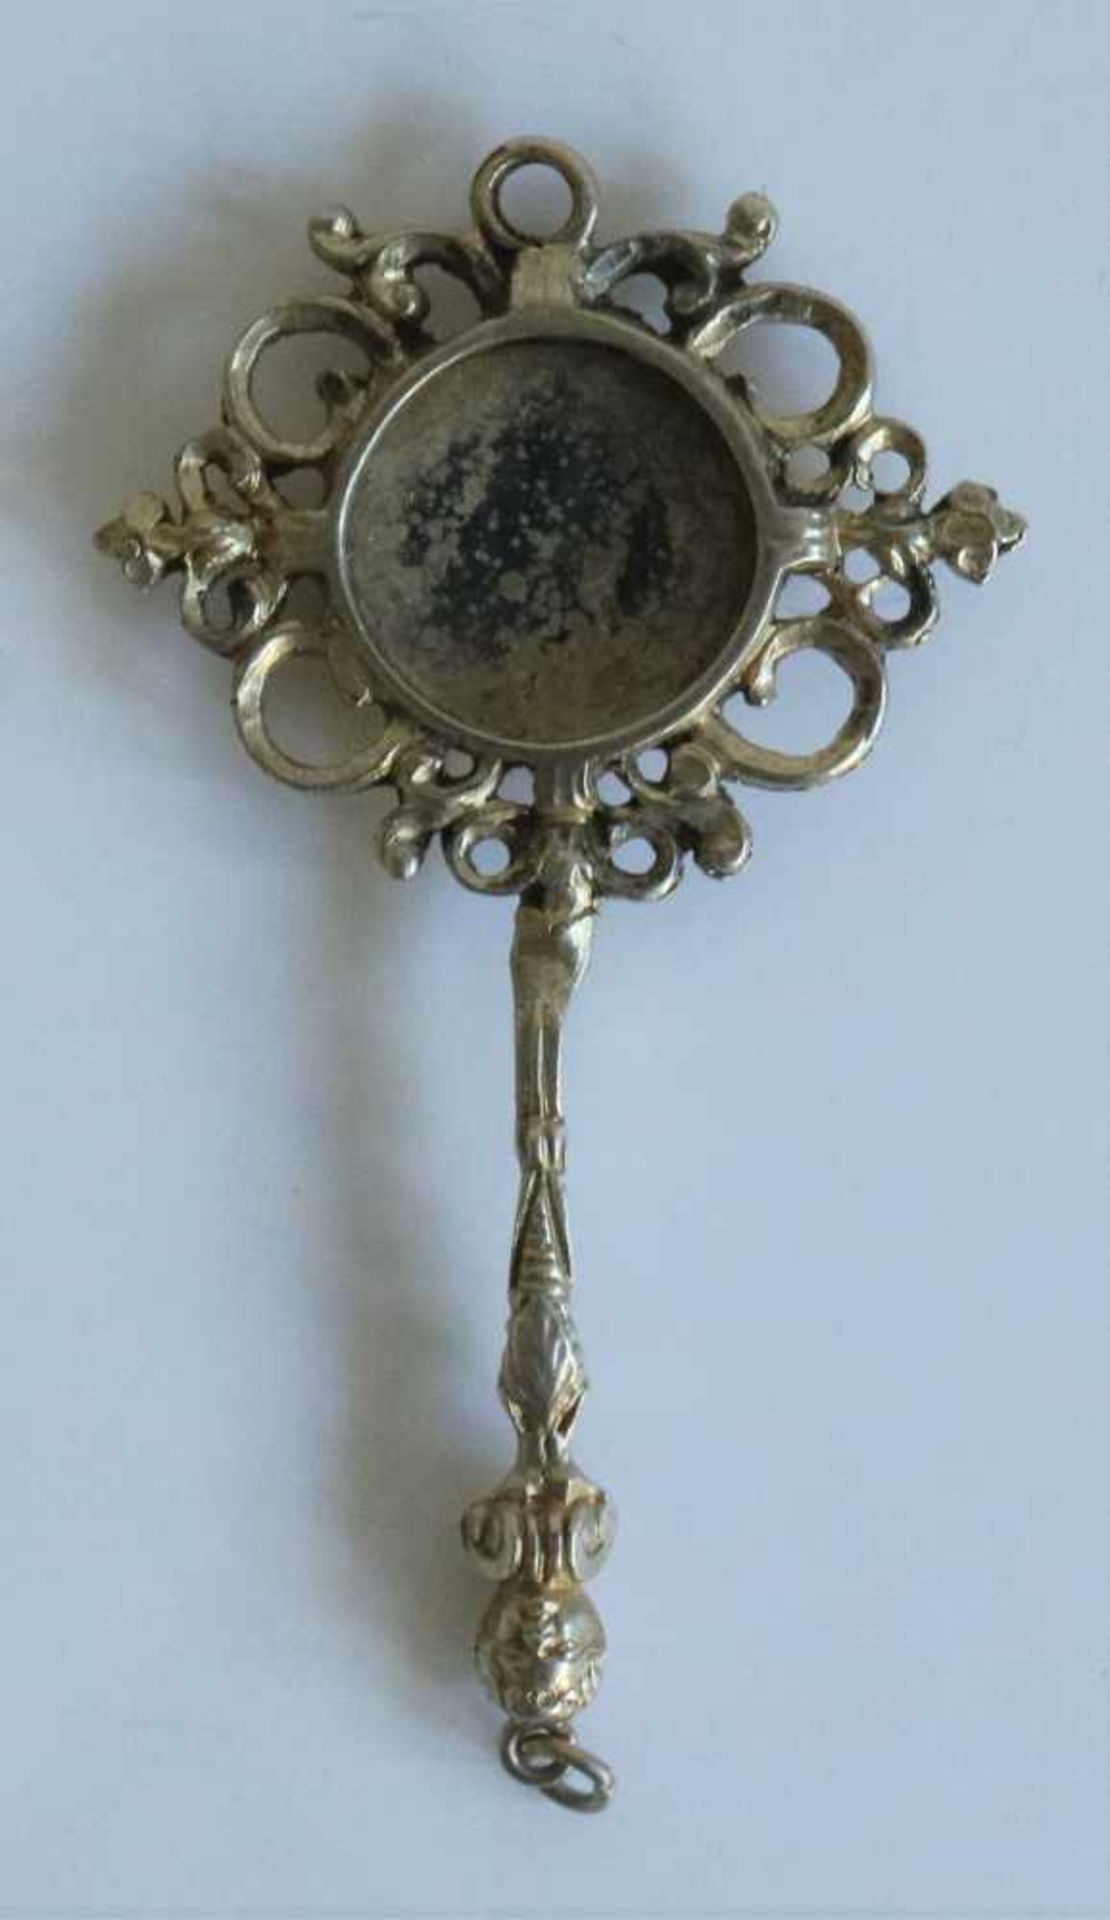 Silver mirror for chatelaine, 19th century 8,5 x 4,5 cm - Image 2 of 2